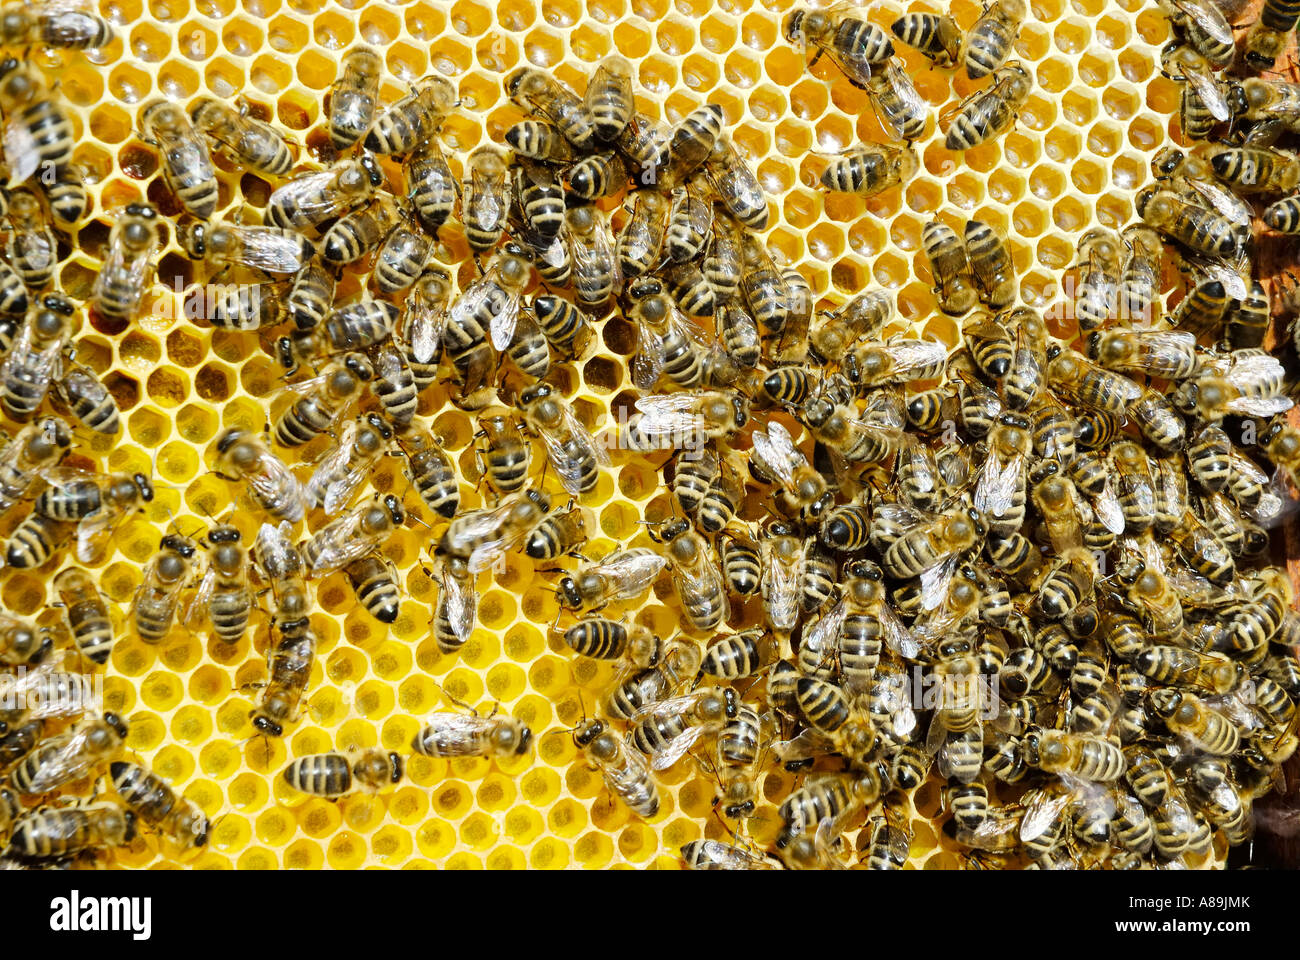 Bees upon freshly constructed honeycomb filled with honey in the upper section and ready to take up eggs in the lower section o Stock Photo